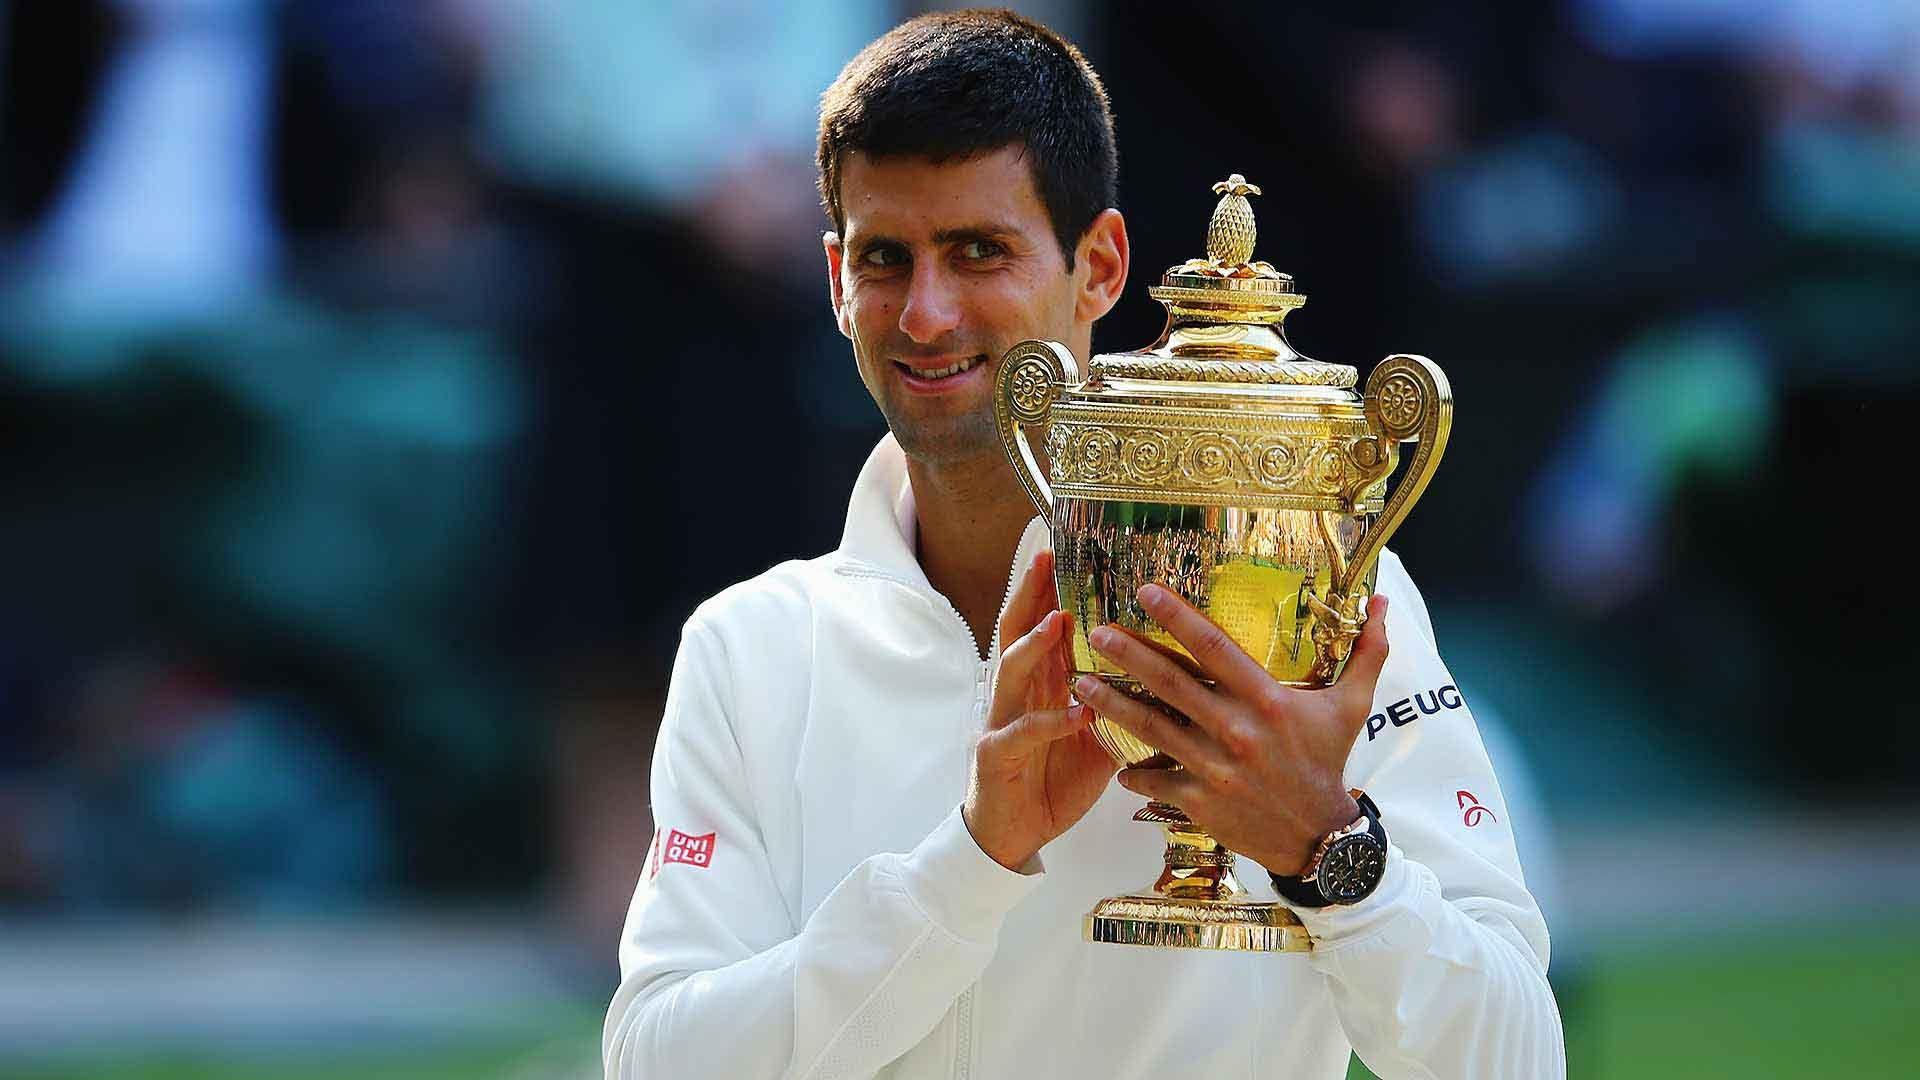 Wimbledon Tennis 2015: Predictions and Early Title Favorites